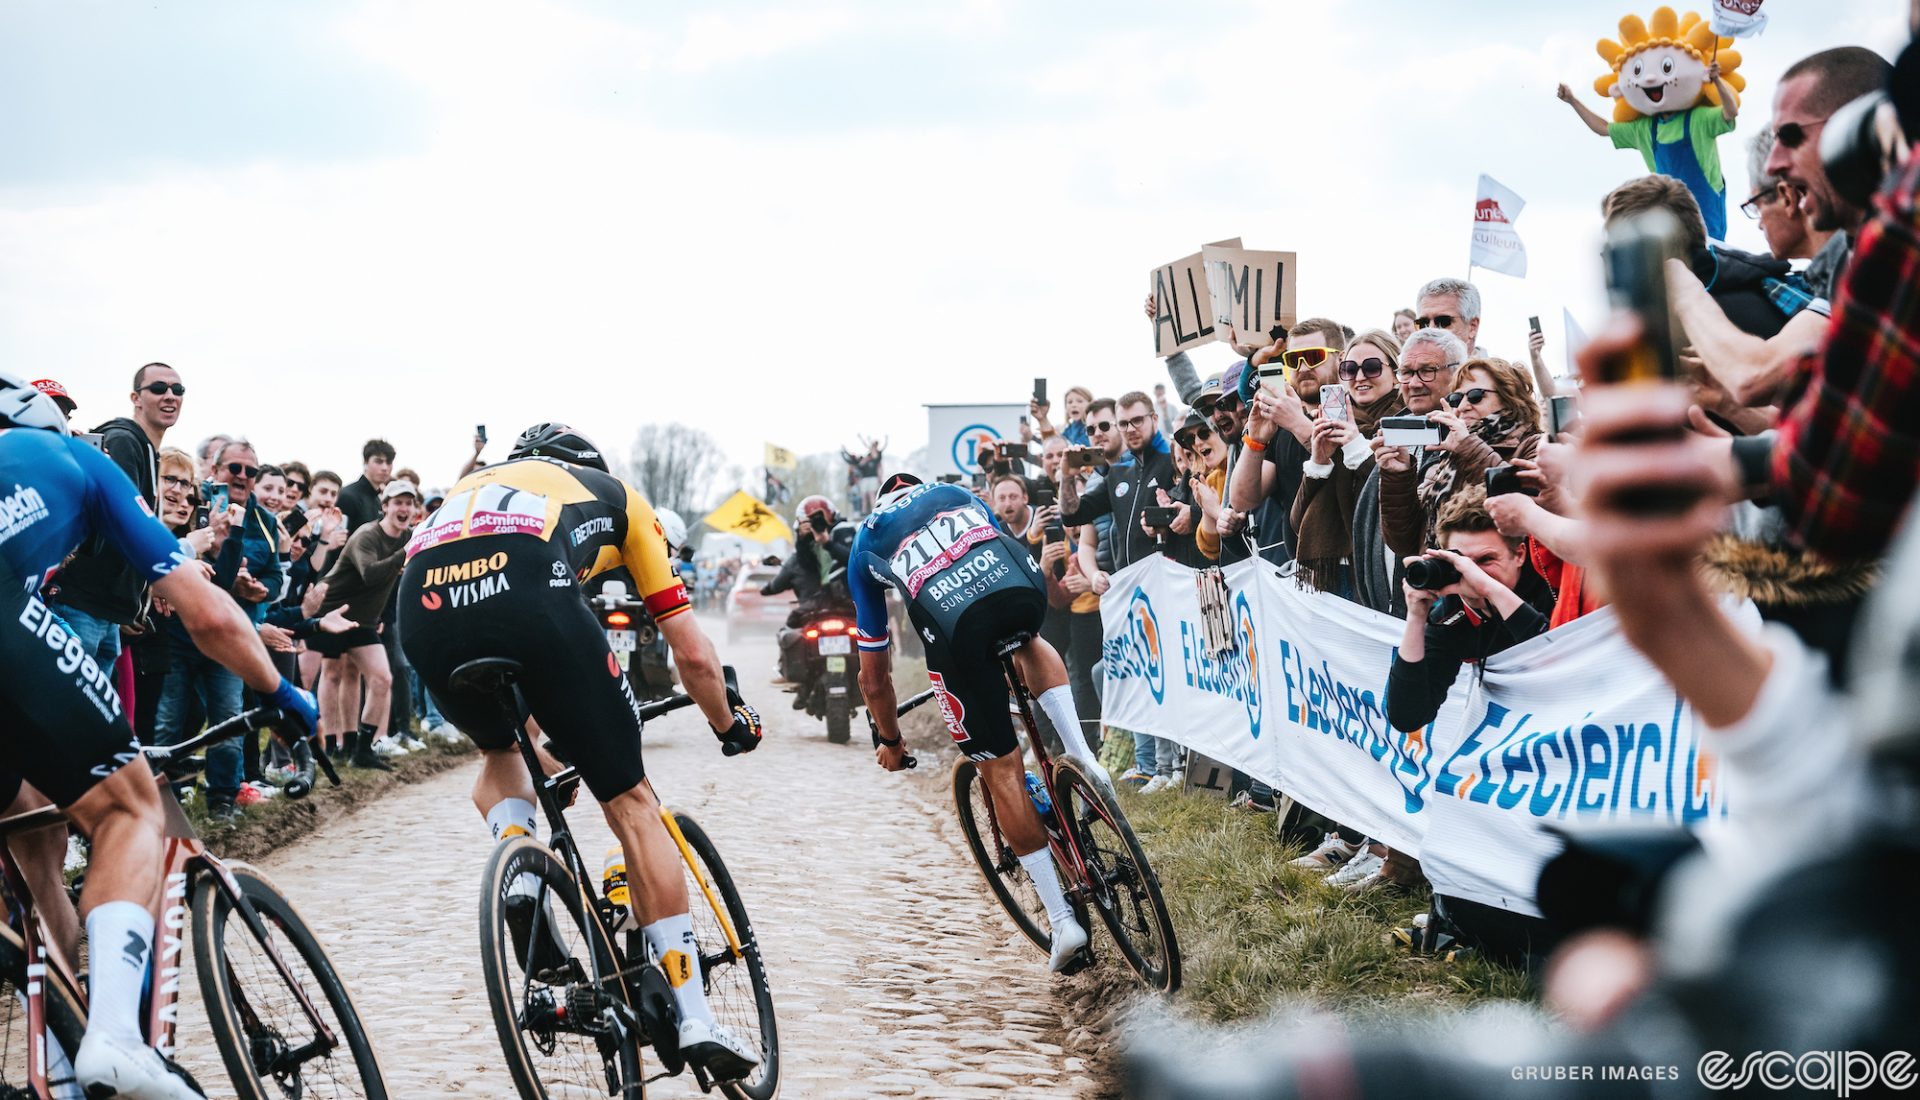 Mathieu van der Poel take a wide line through a corner at Paris-Roubaix. He's gone into the grass on the far side and is twisting his bike to get back on the cobbles, while Wout van Aert and Jasper Phillipsen behind take more conventional lines through the corner.